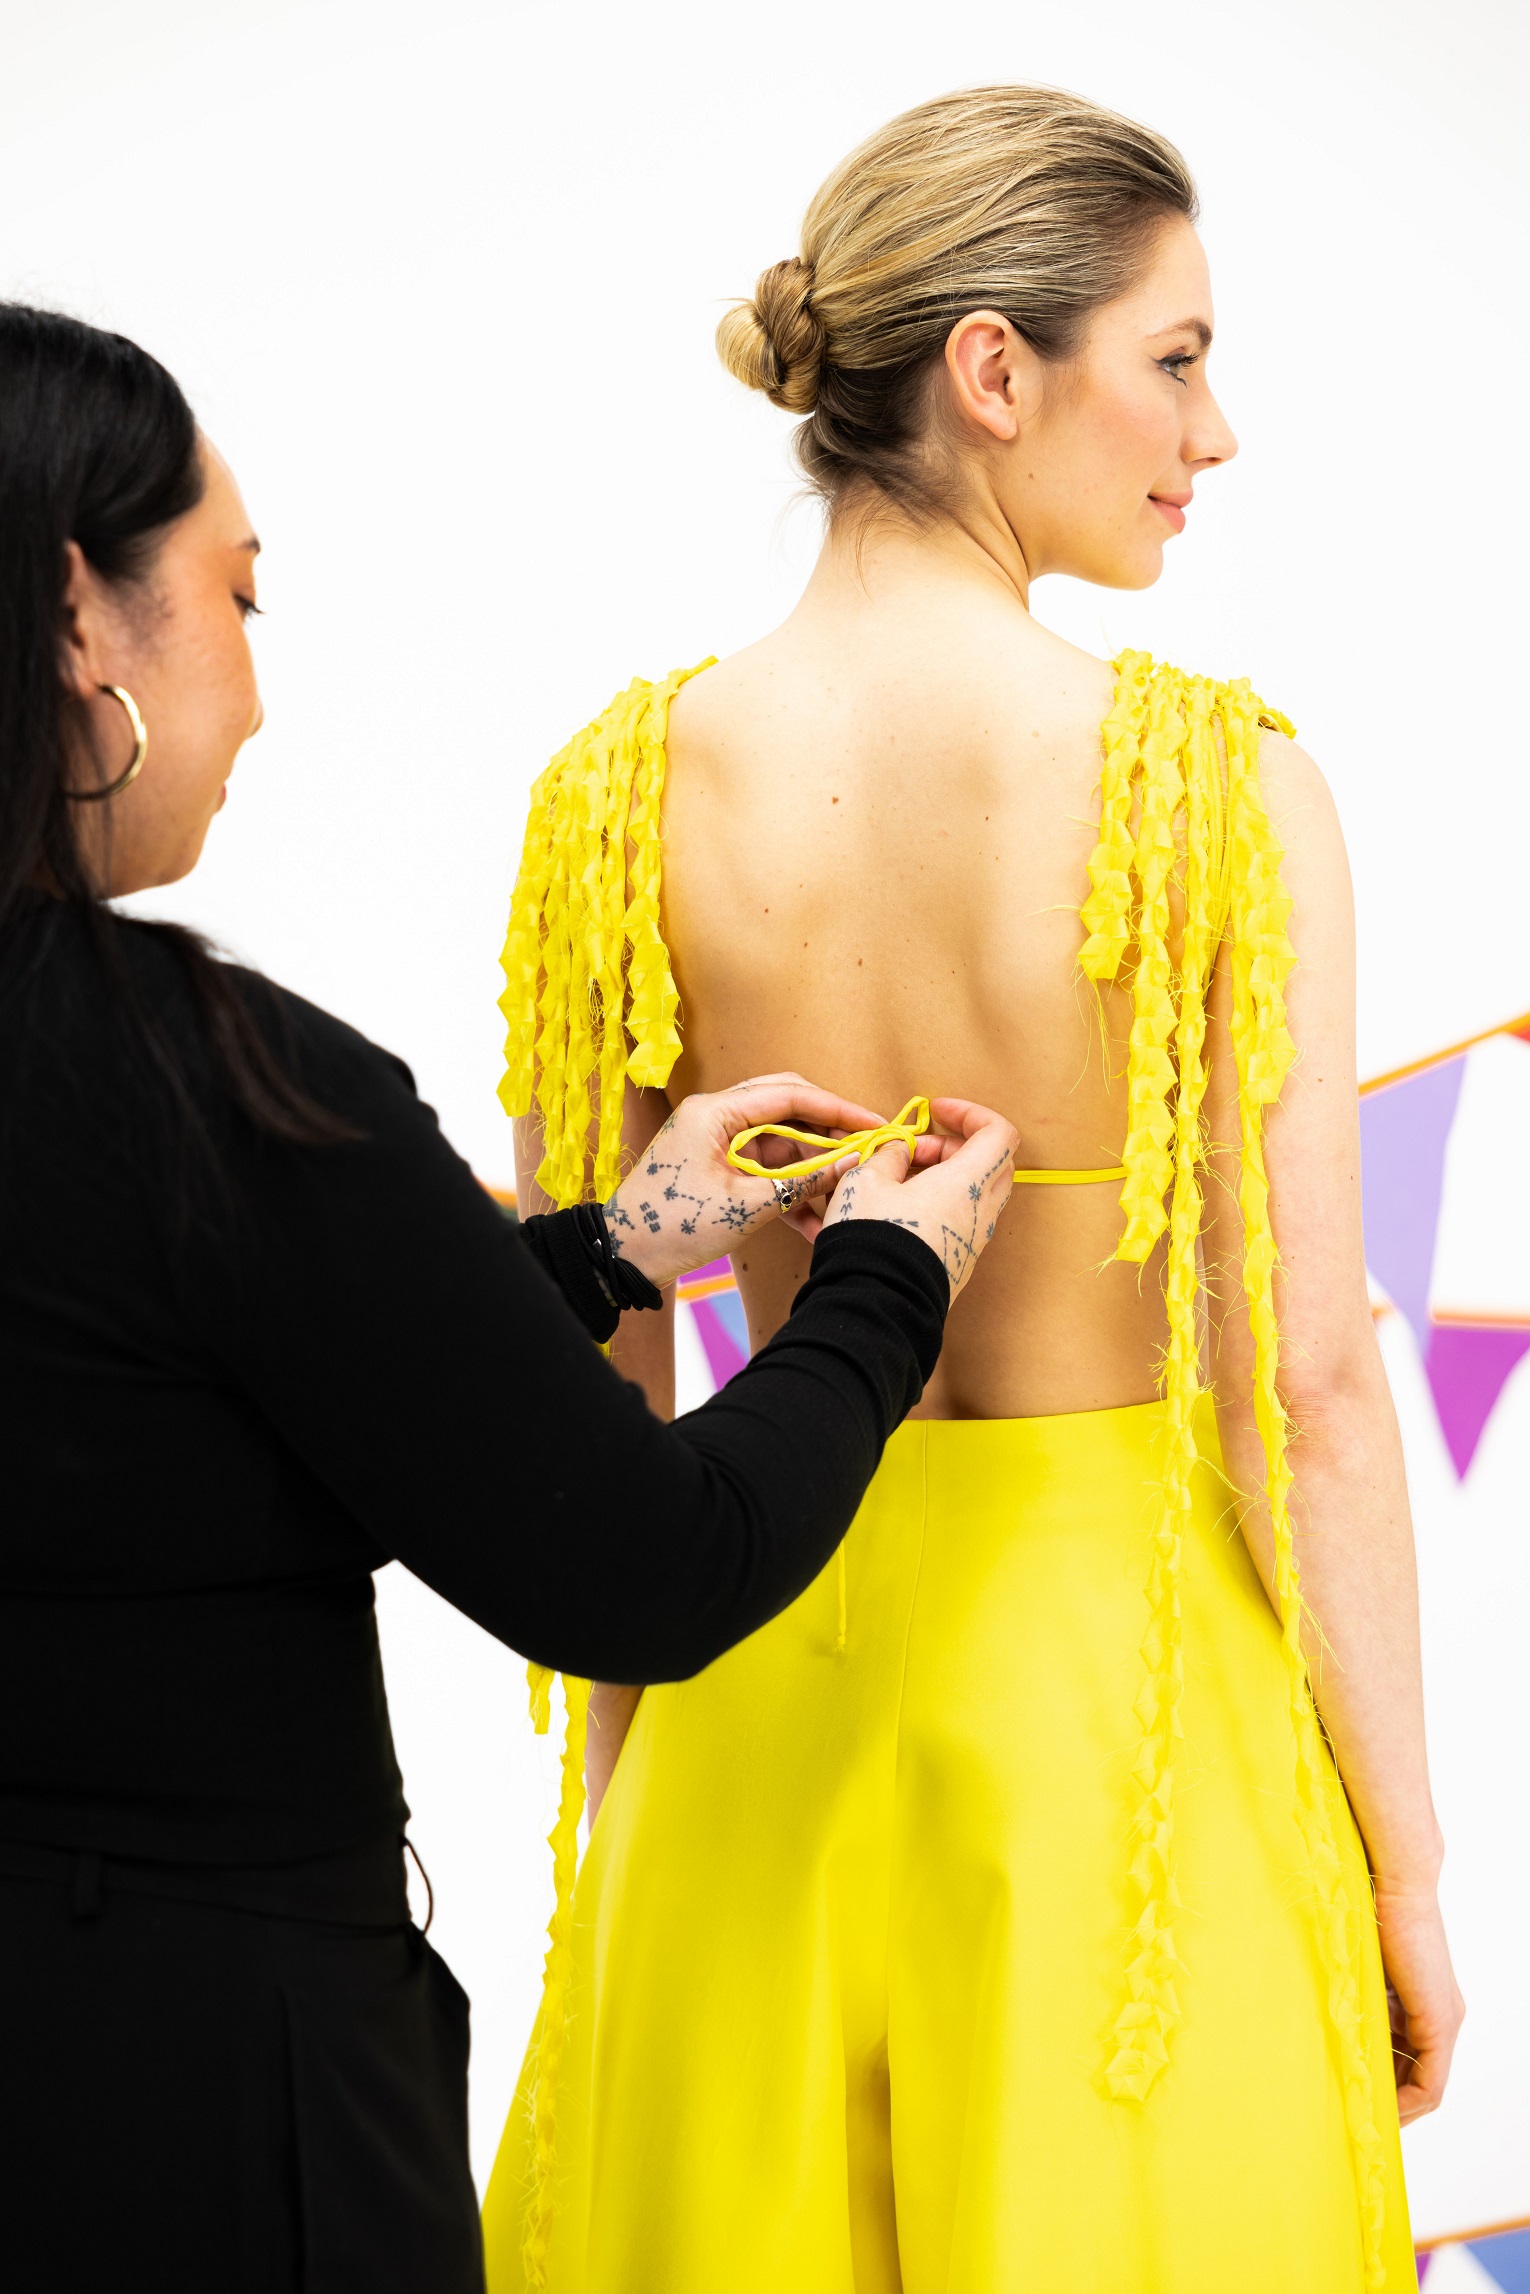 The tendrils on the back of the dress represent the waterfalls of Samoa.